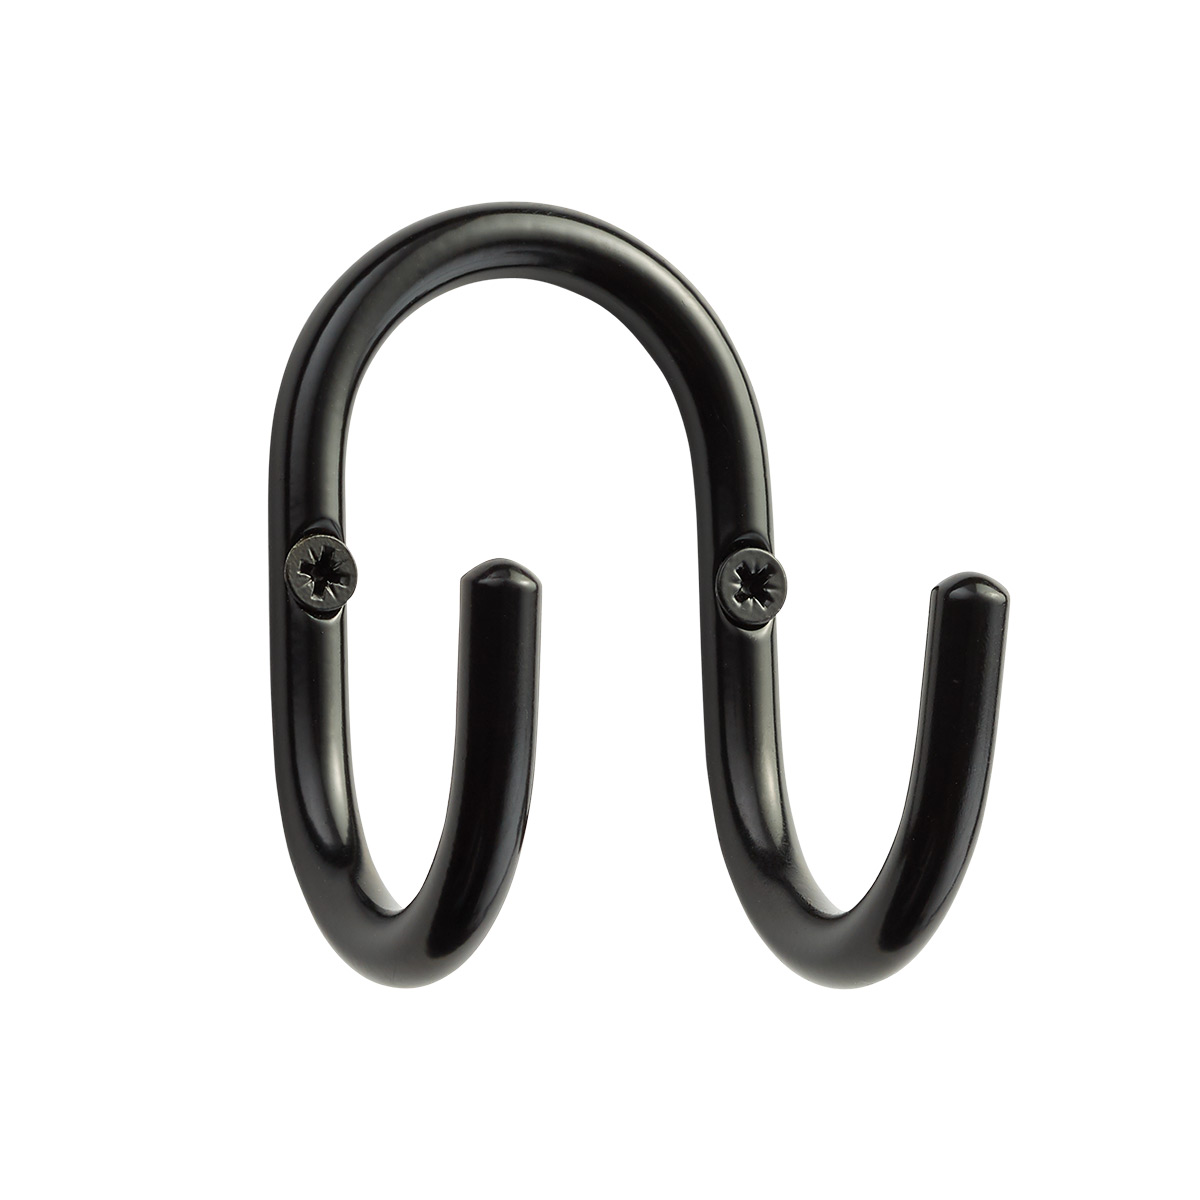 https://www.containerstore.com/catalogimages/364885/10077226-classic-double-hook-black.jpg